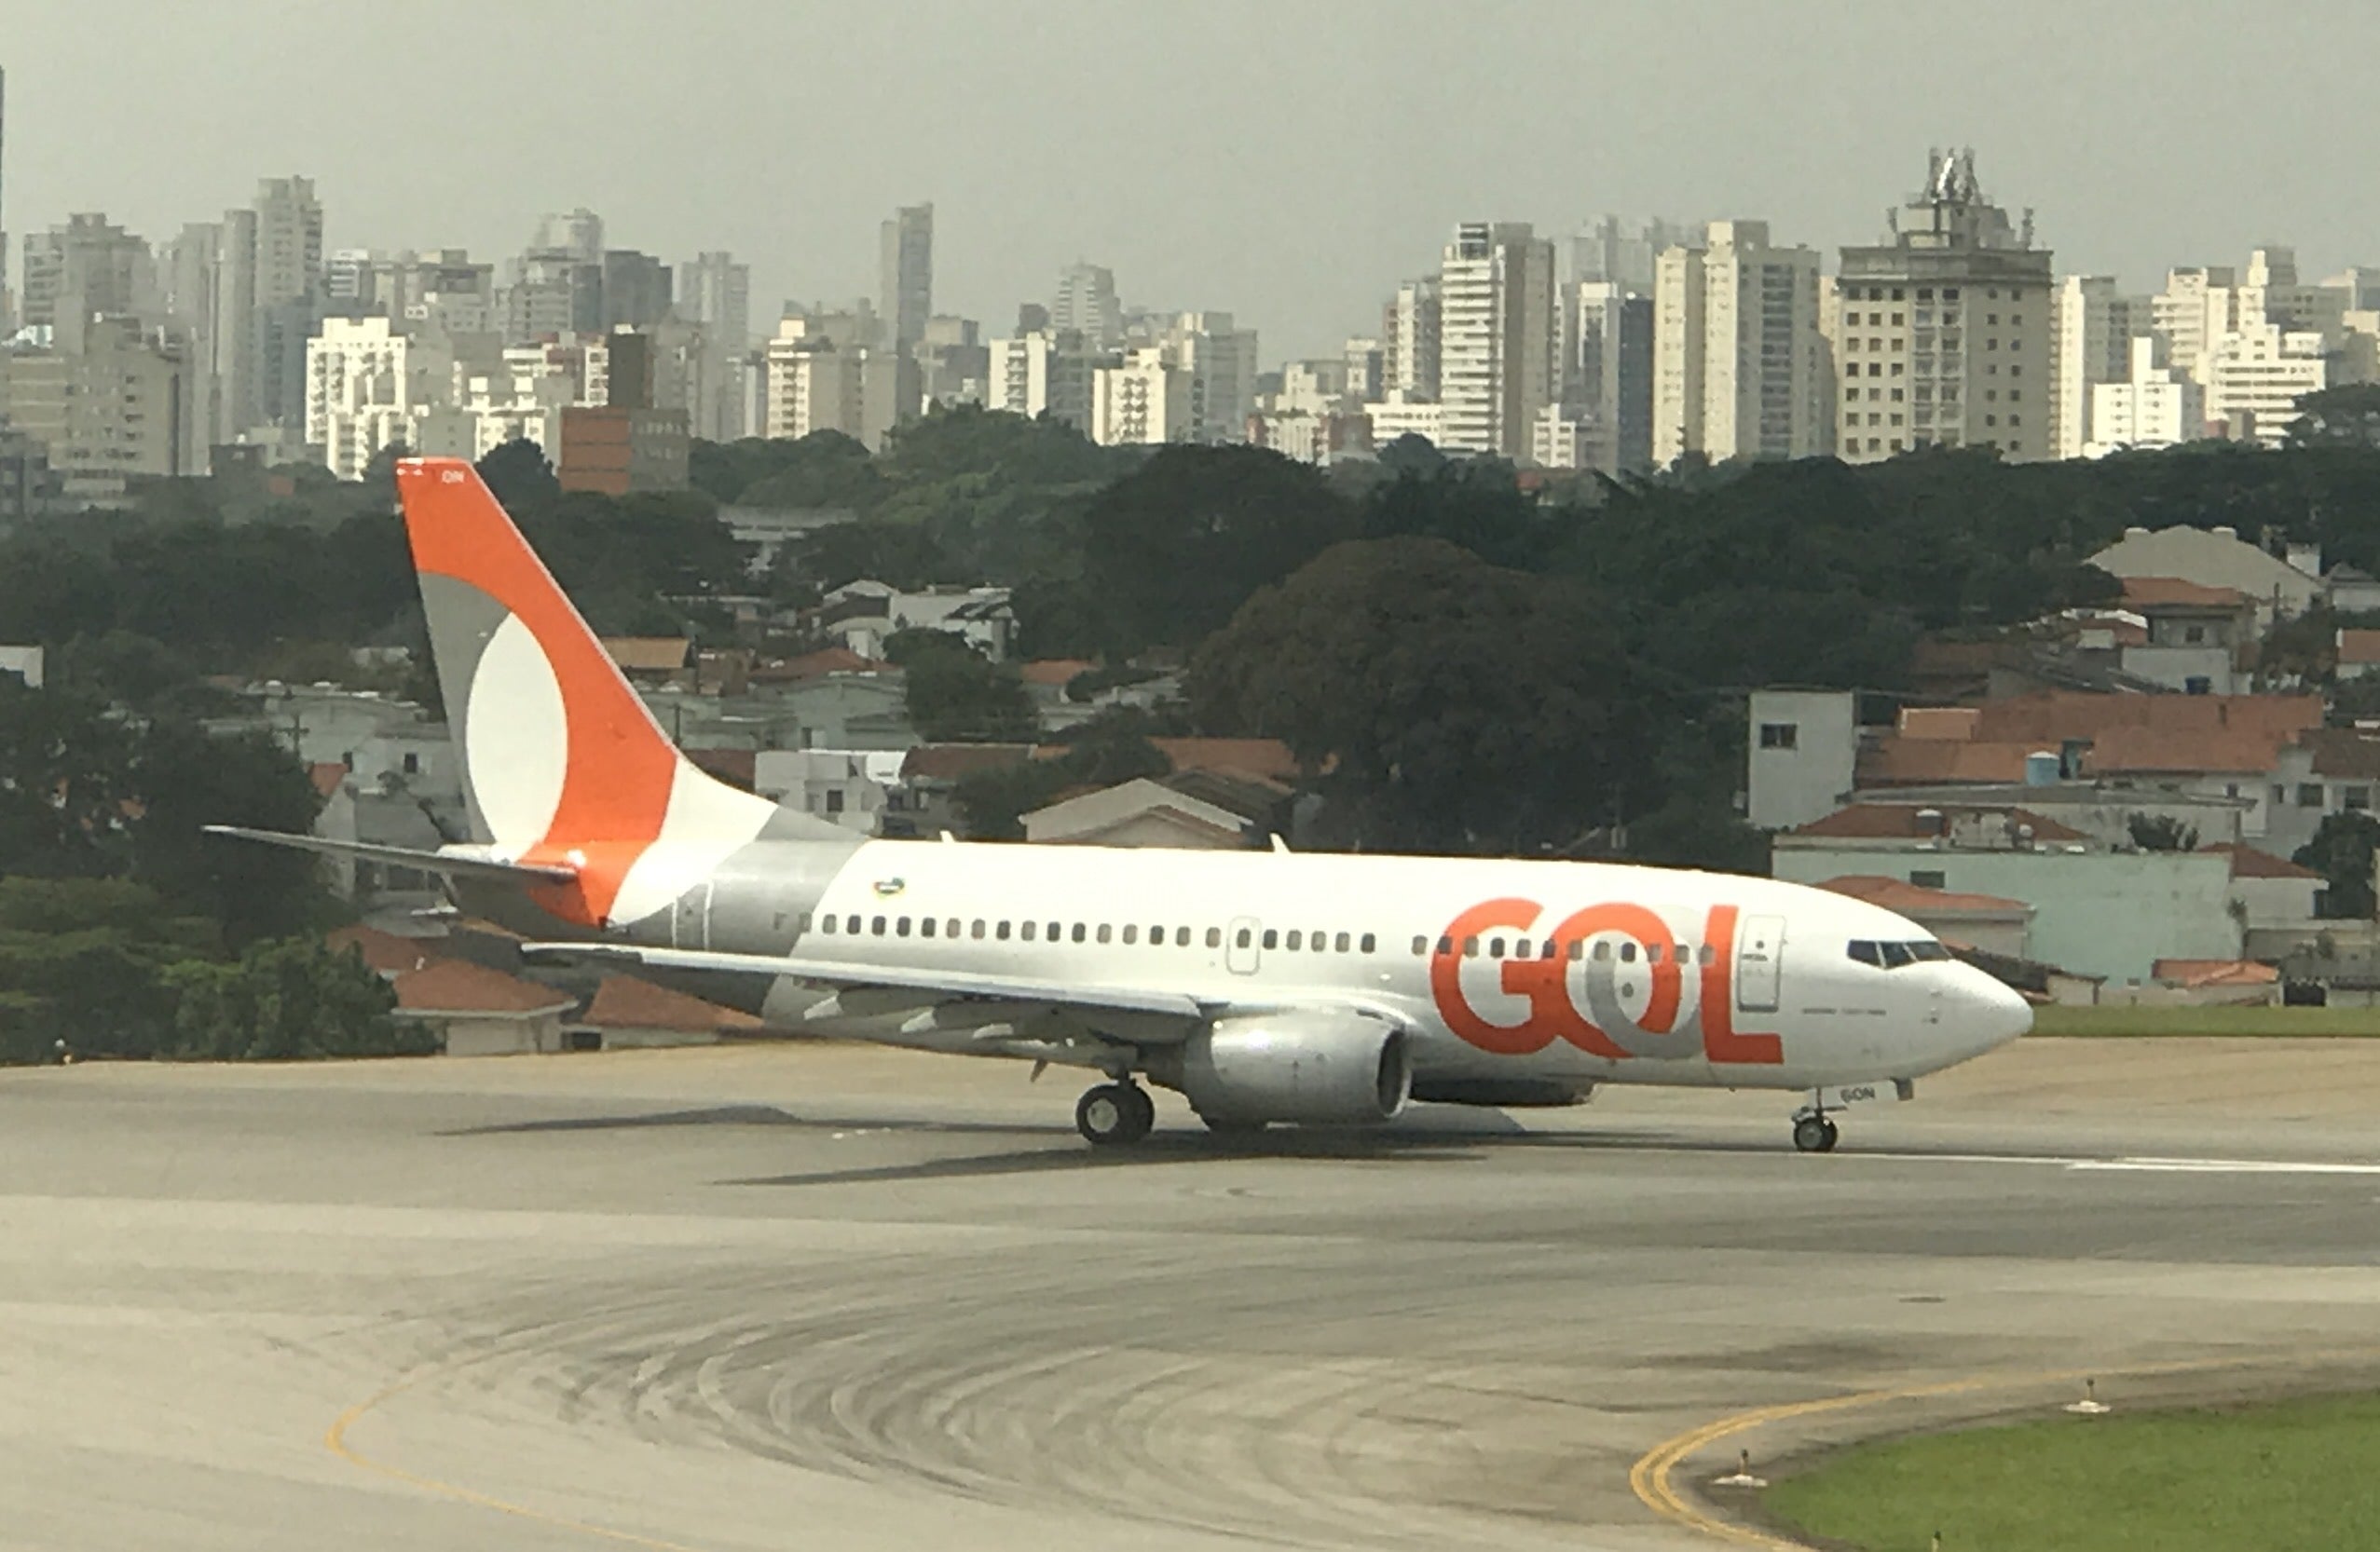 A GOL aircraft waiting to take of at São Paulo Congonhas Airport, Brazil